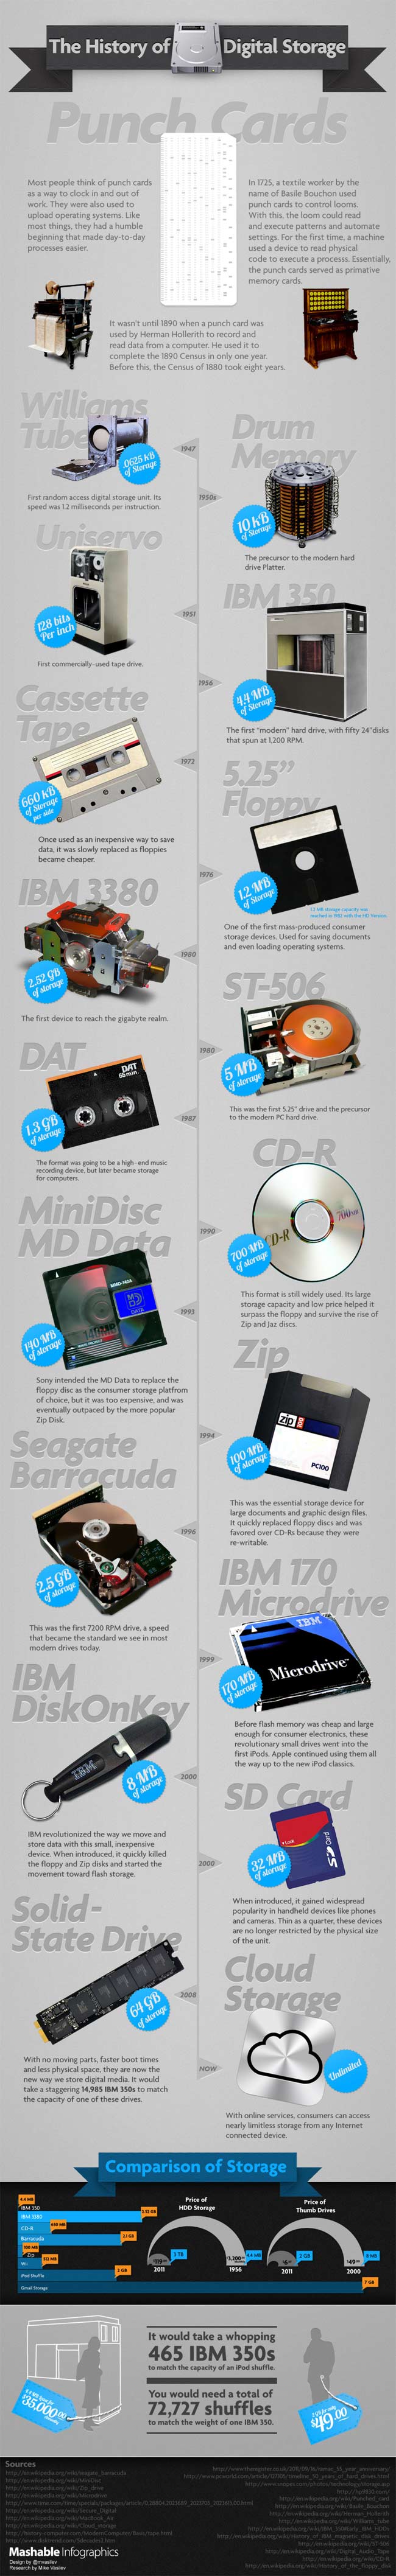 digital-storage-space-history-infographic